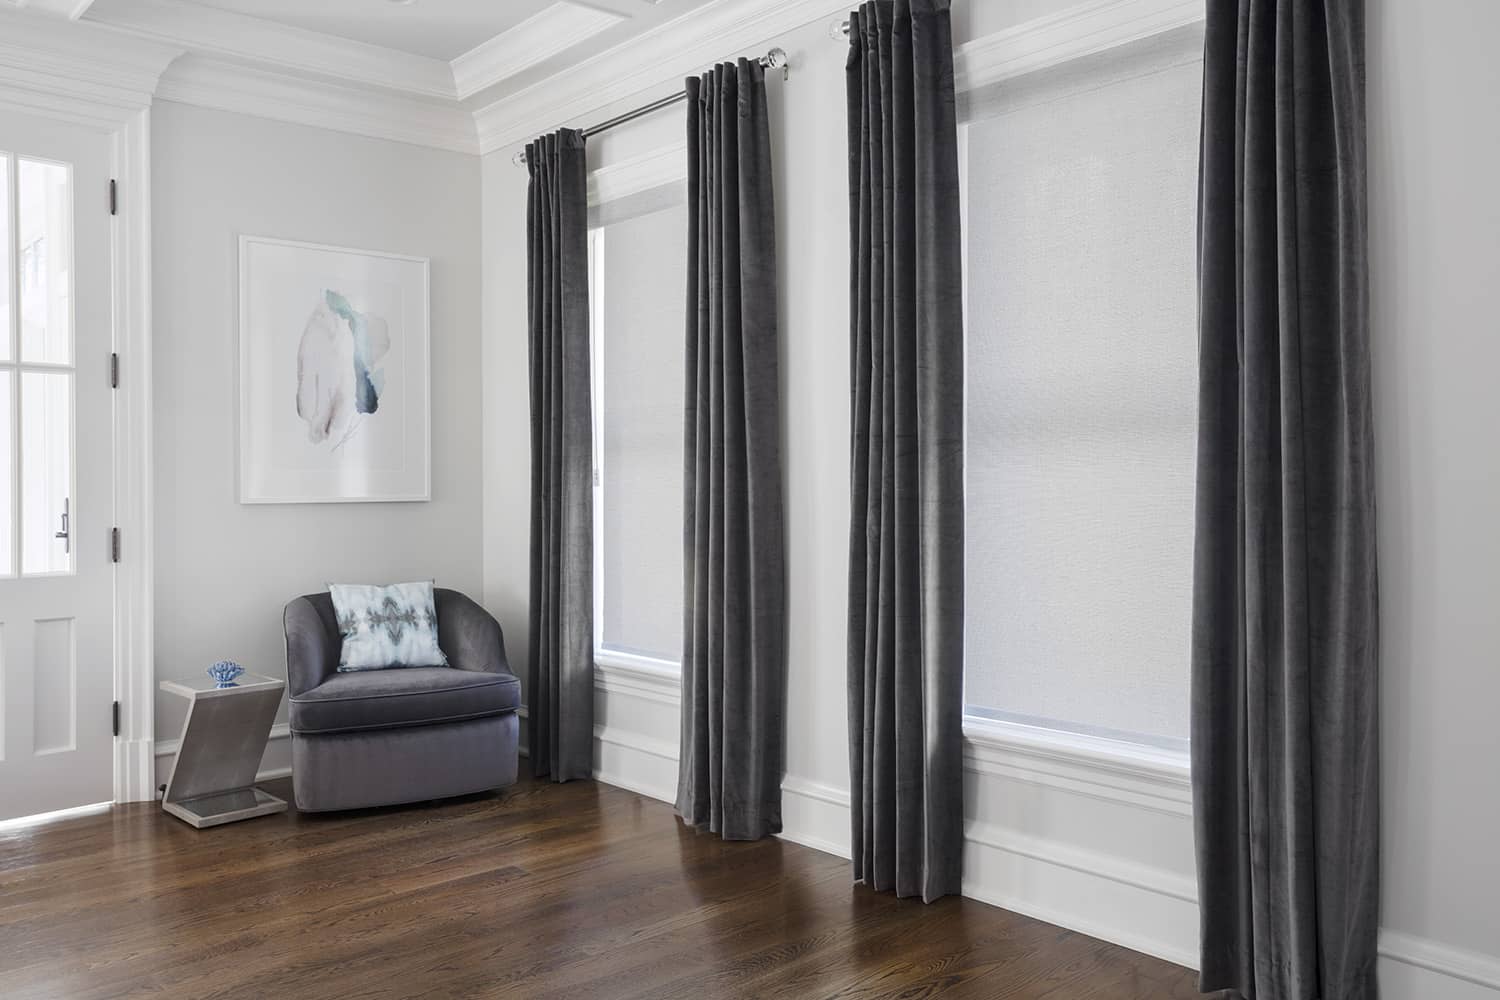 What is the rule for curtain size?